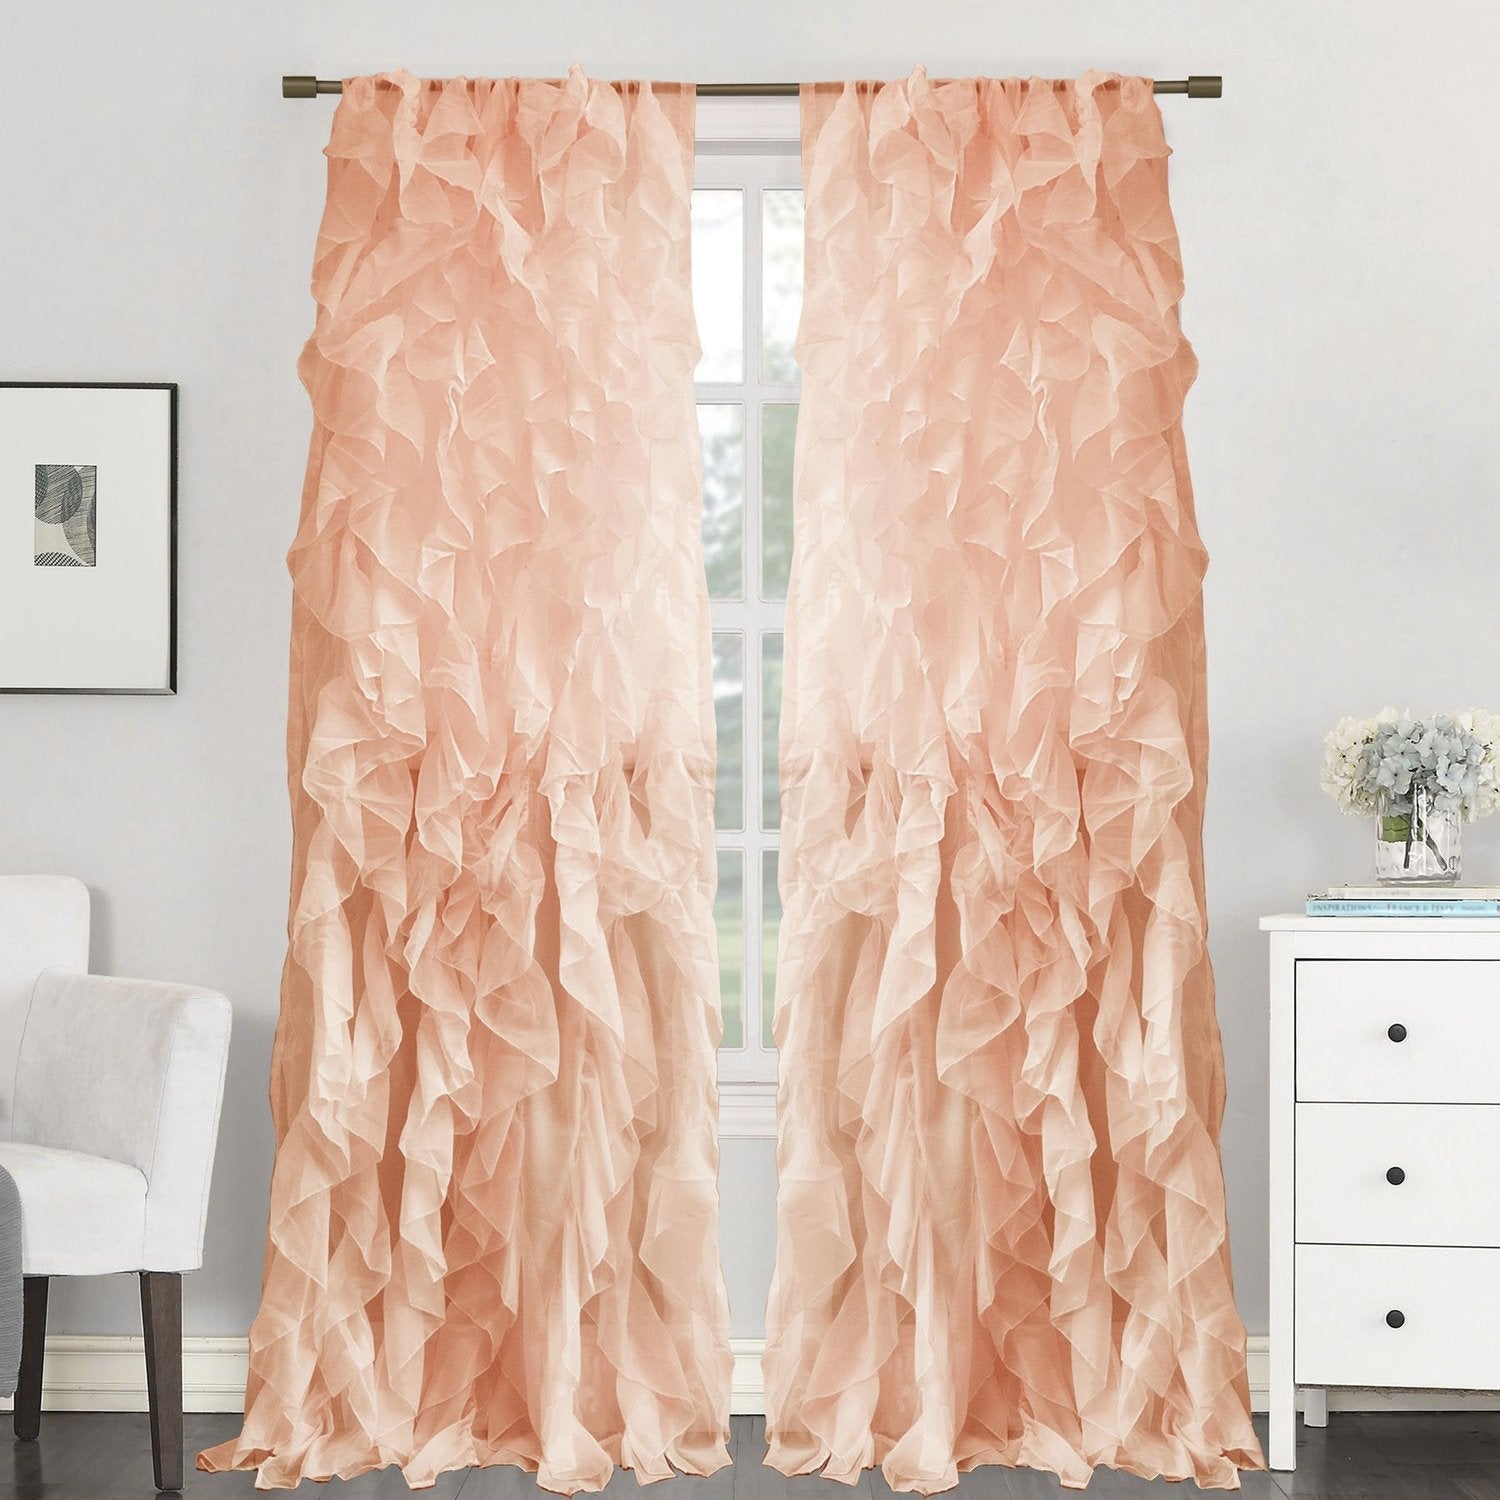 Chic Sheer Voile Ruffled Window Curtain 2-Pack Spice 84X100